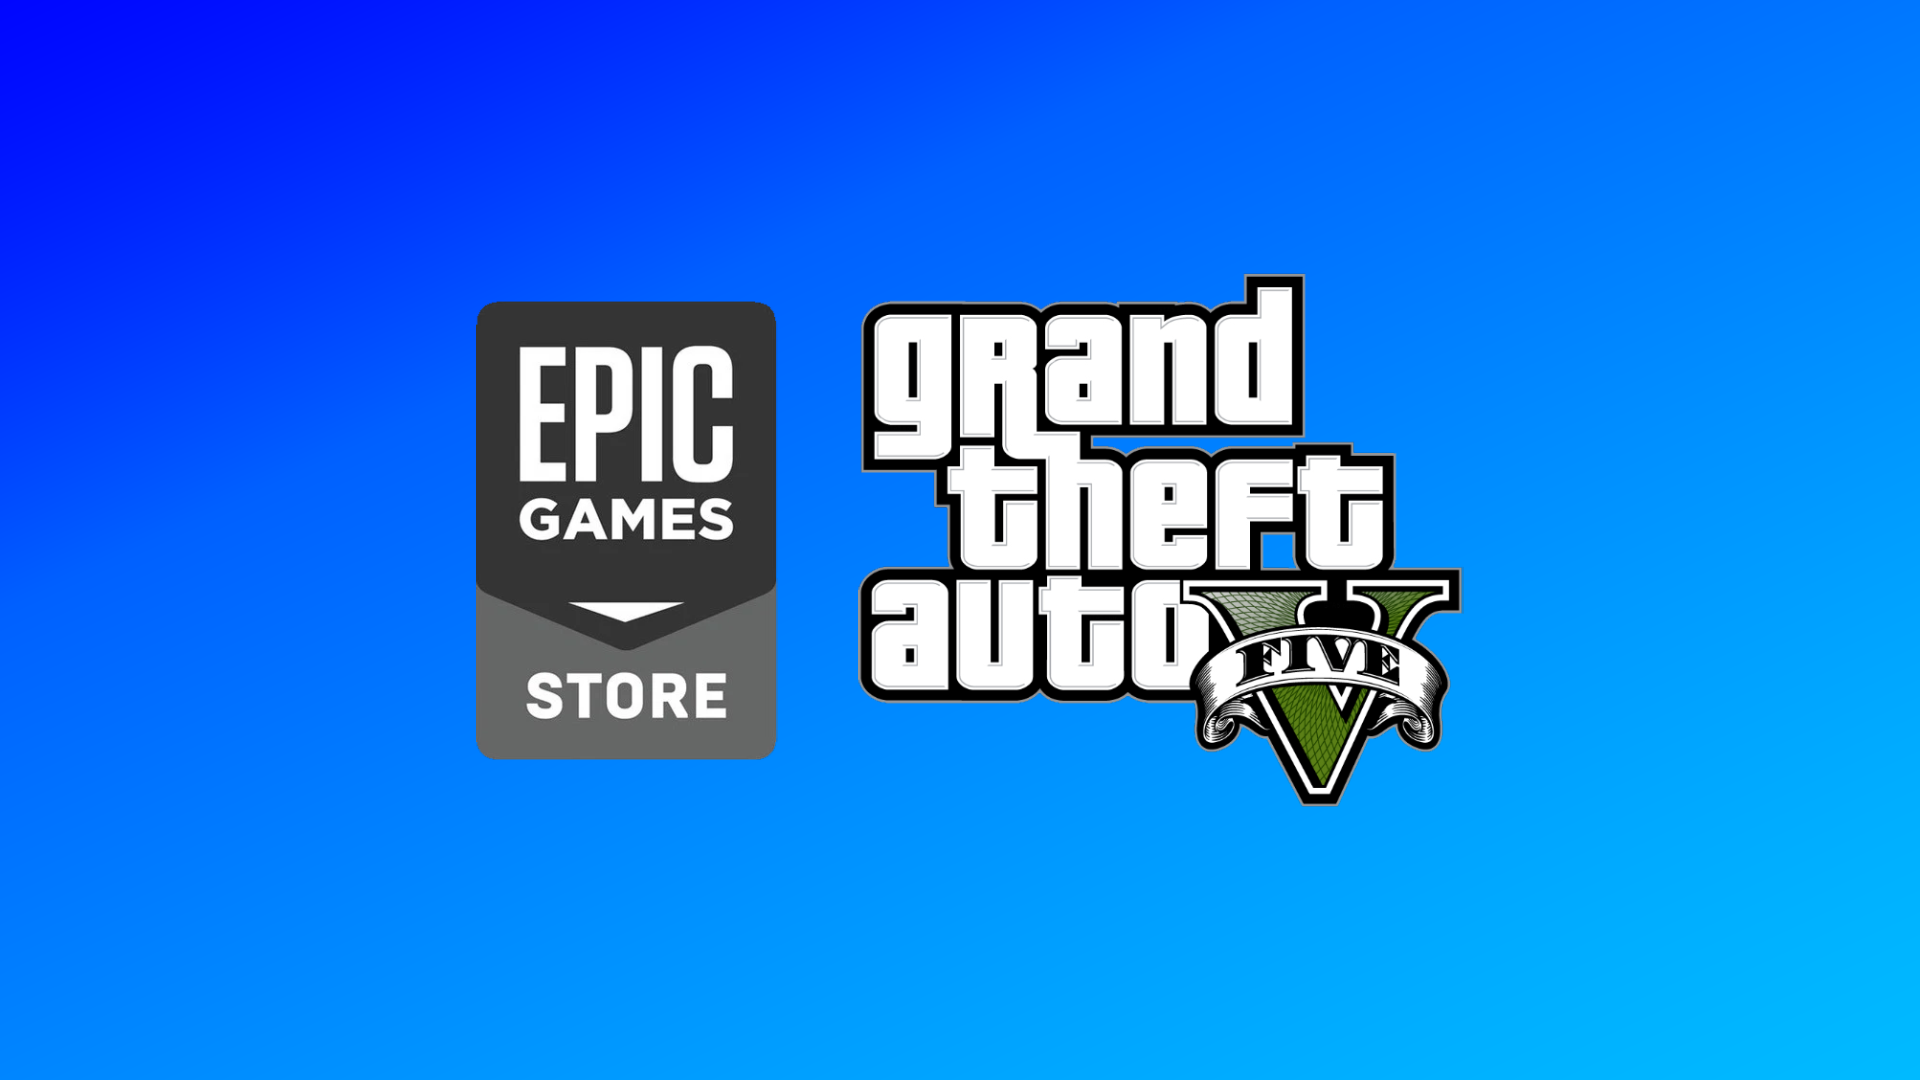 GTA 5 is now Free on Epic Games Store